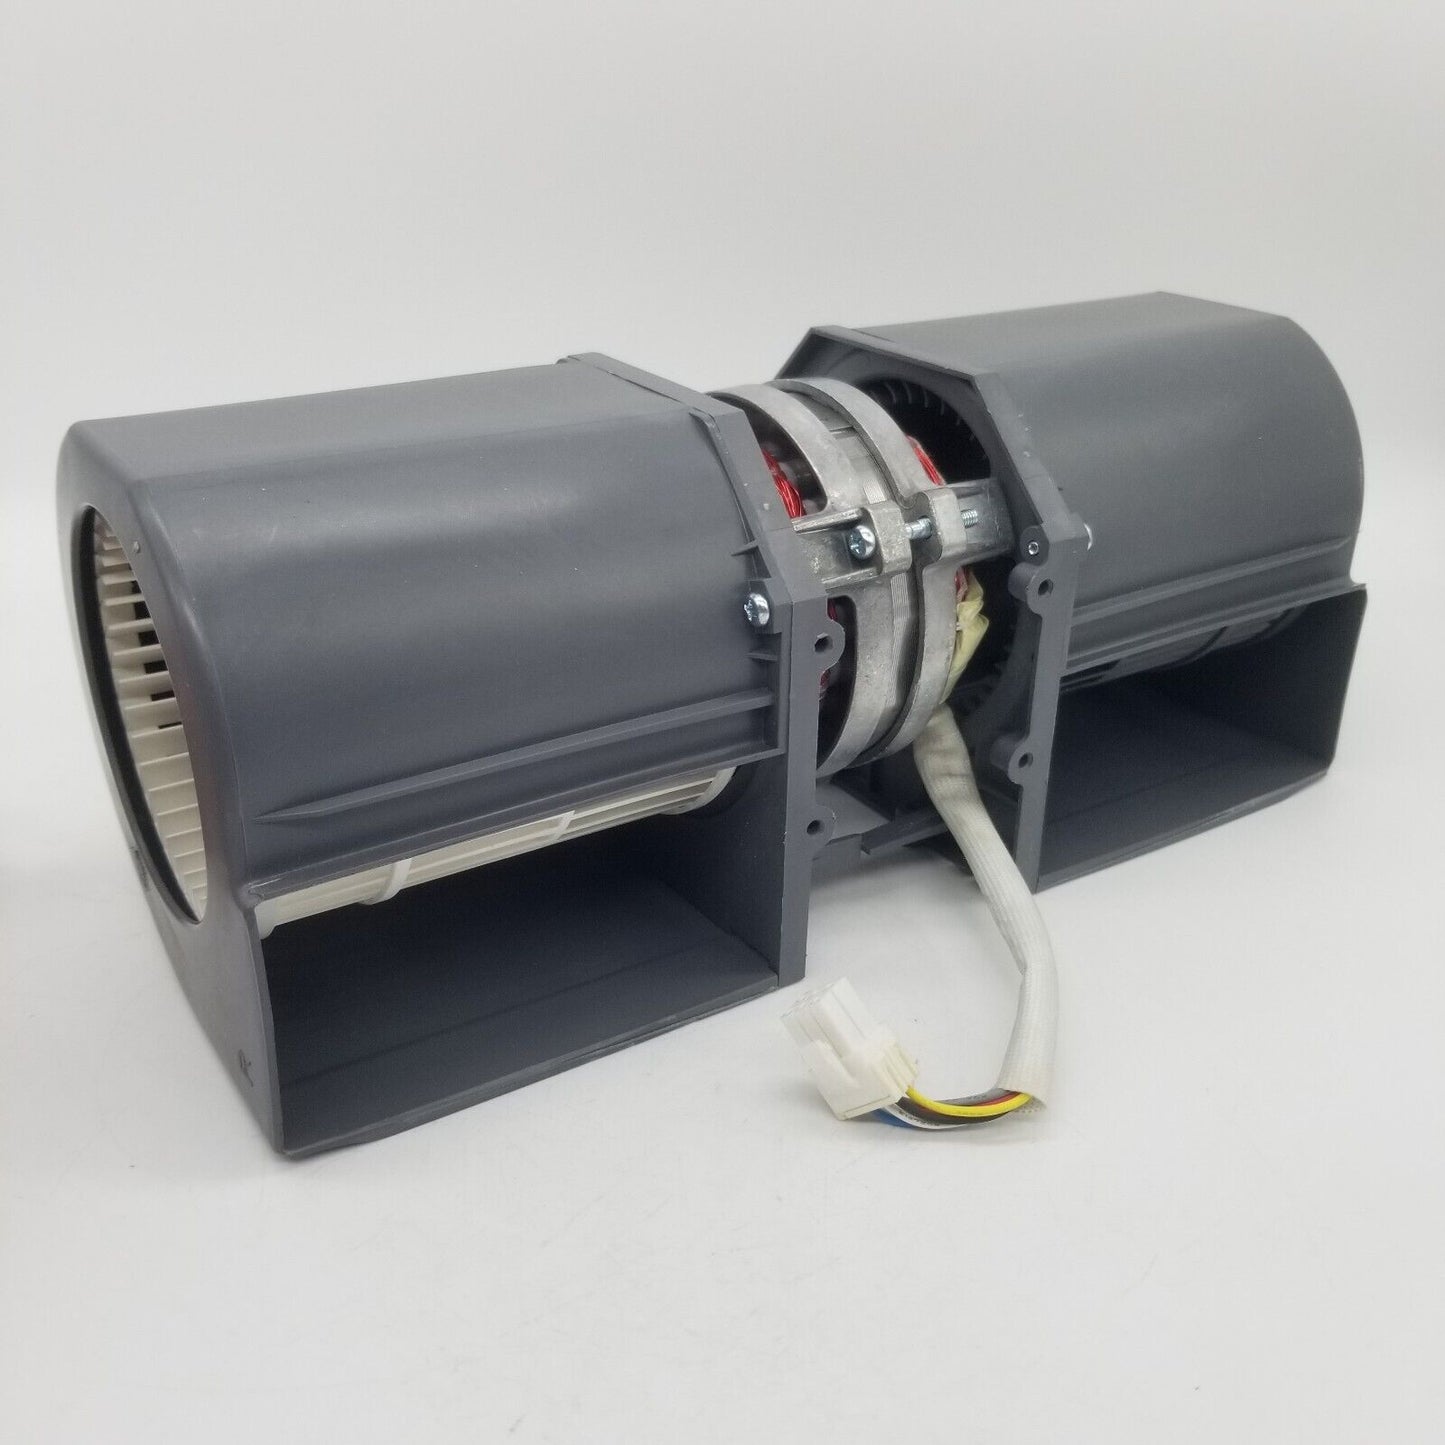 New Genuine OEM Replacement for Whirlpool Microwave Blower Motor W11409098